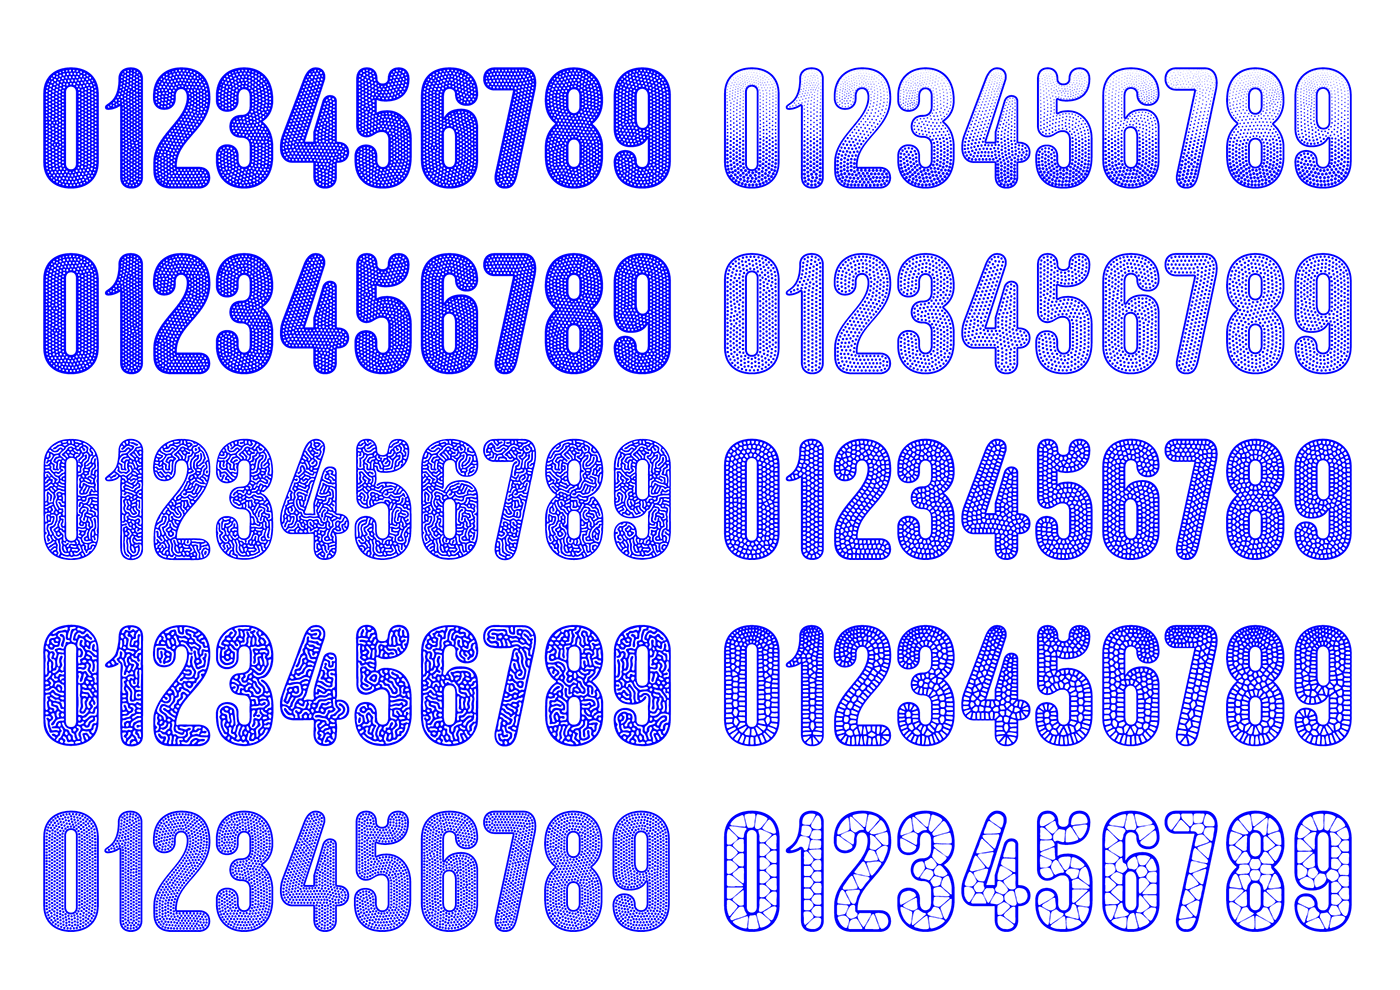 Typeface font animals pattern expressive Display Jean-Baptiste Levée  production type rounded bold